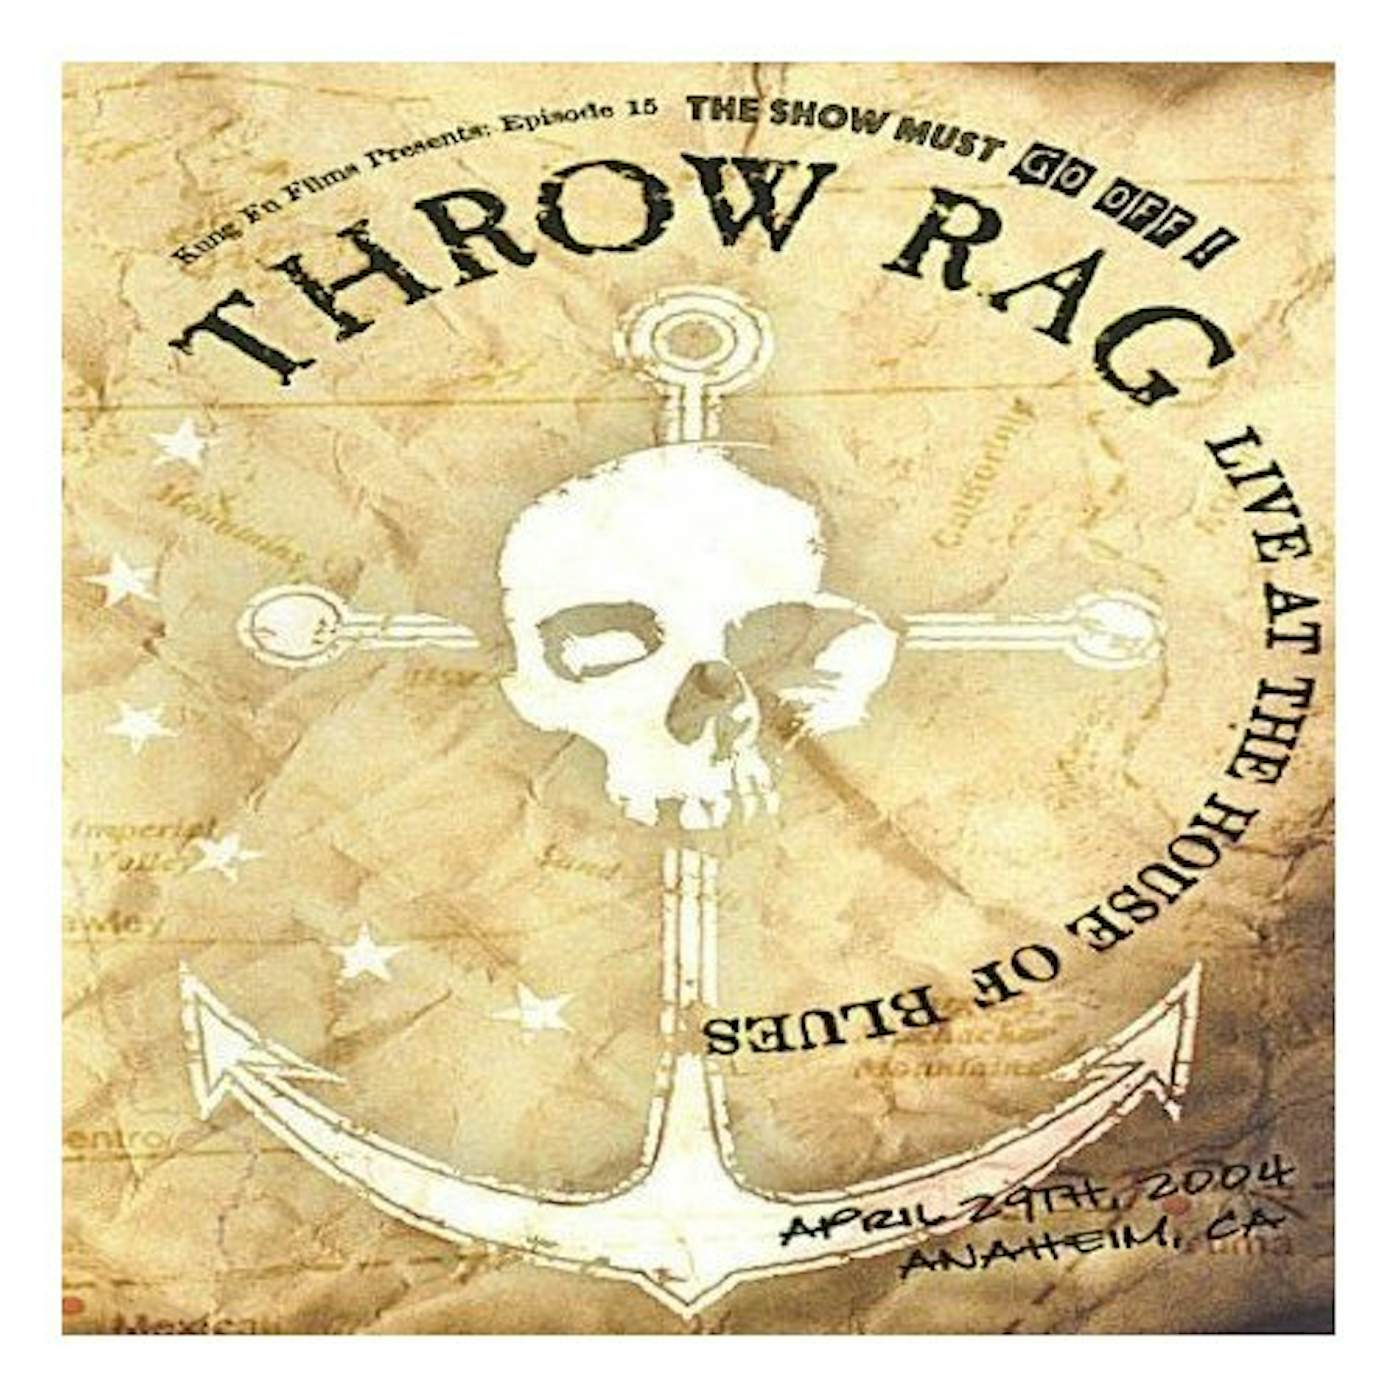 Throw Rag LIVE AT THE HOUSE OF BLUES DVD